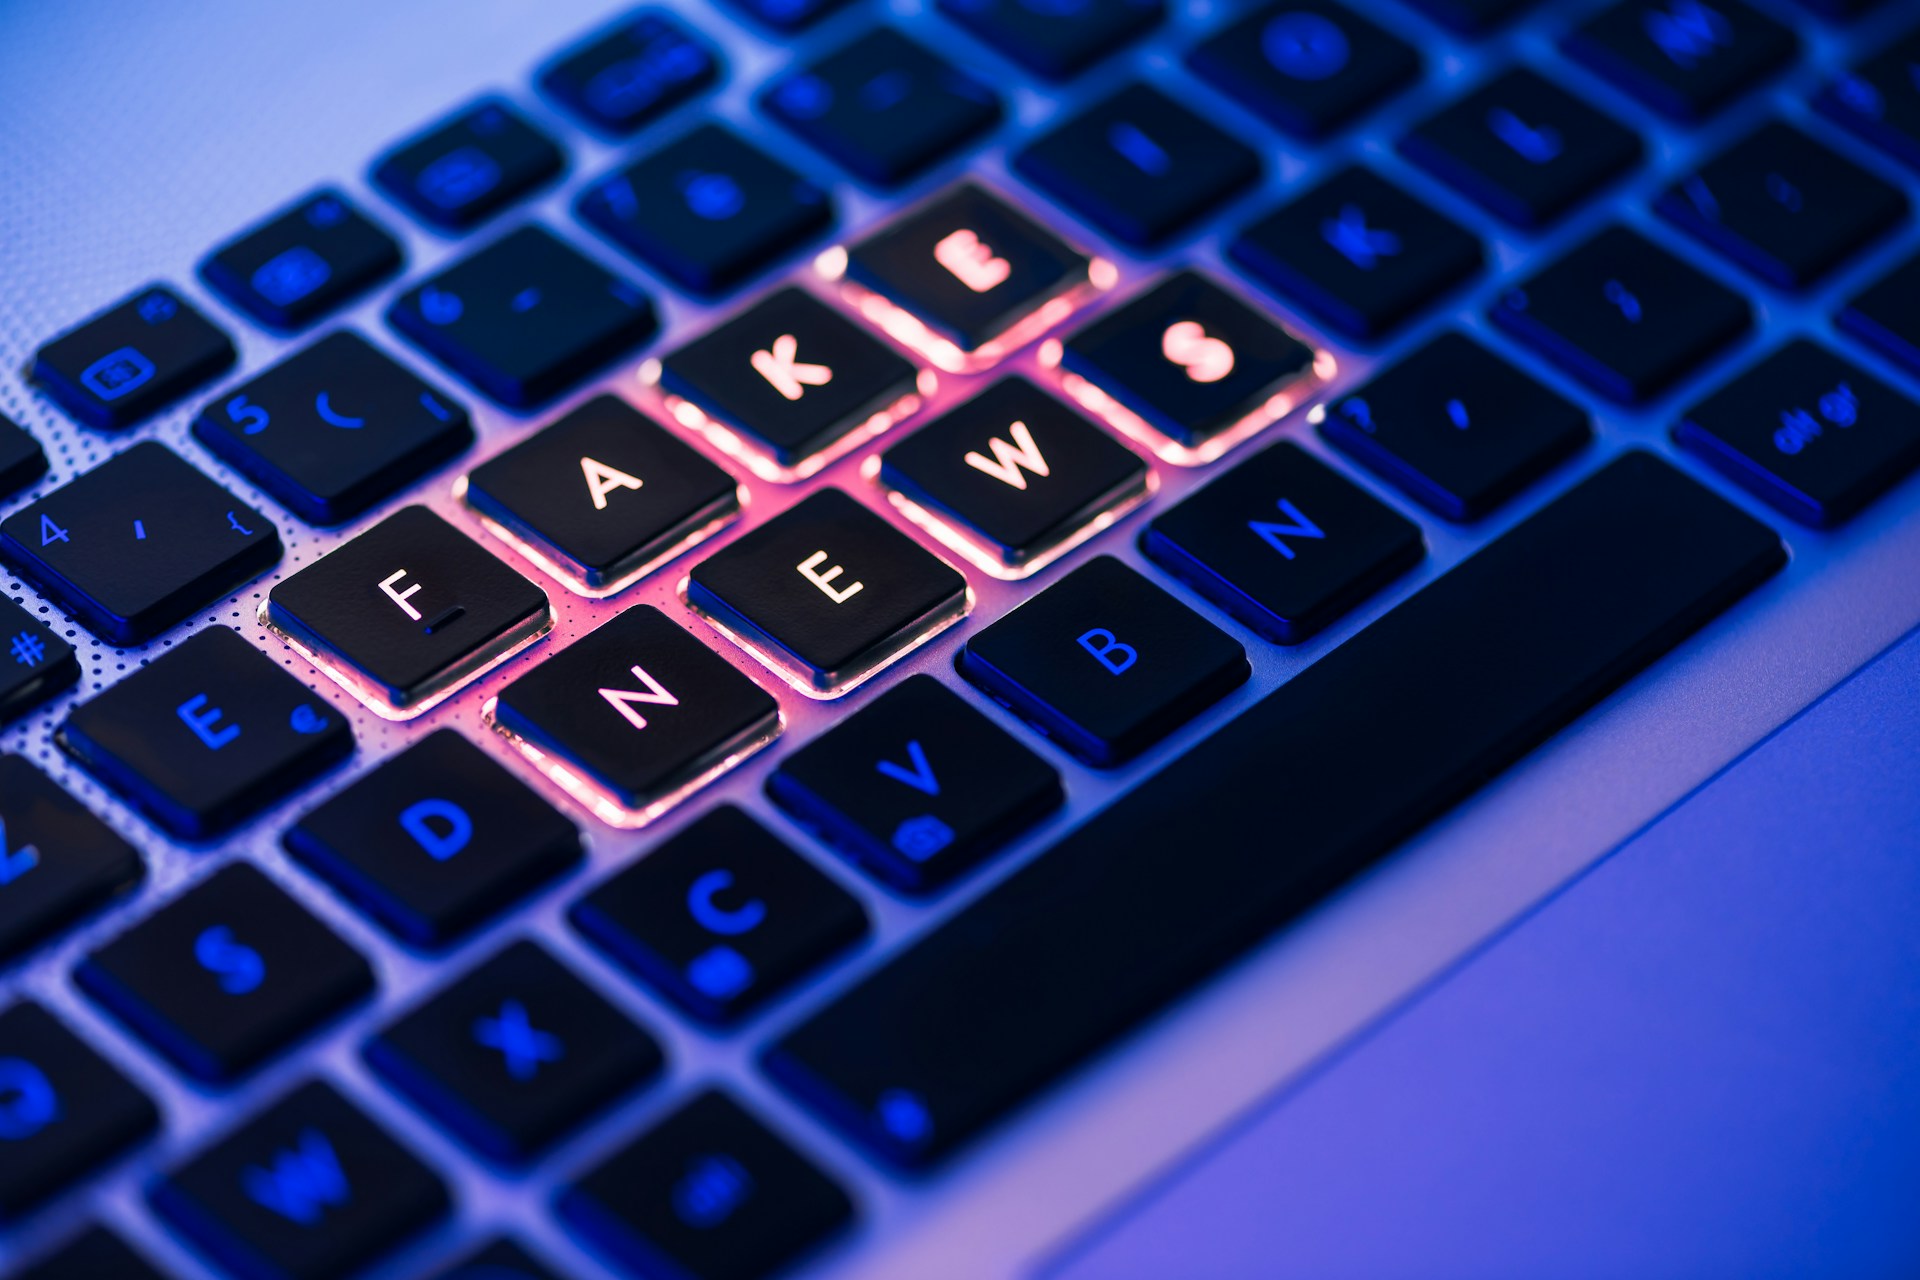 A keyboard image with the word "fake news" being highlighted